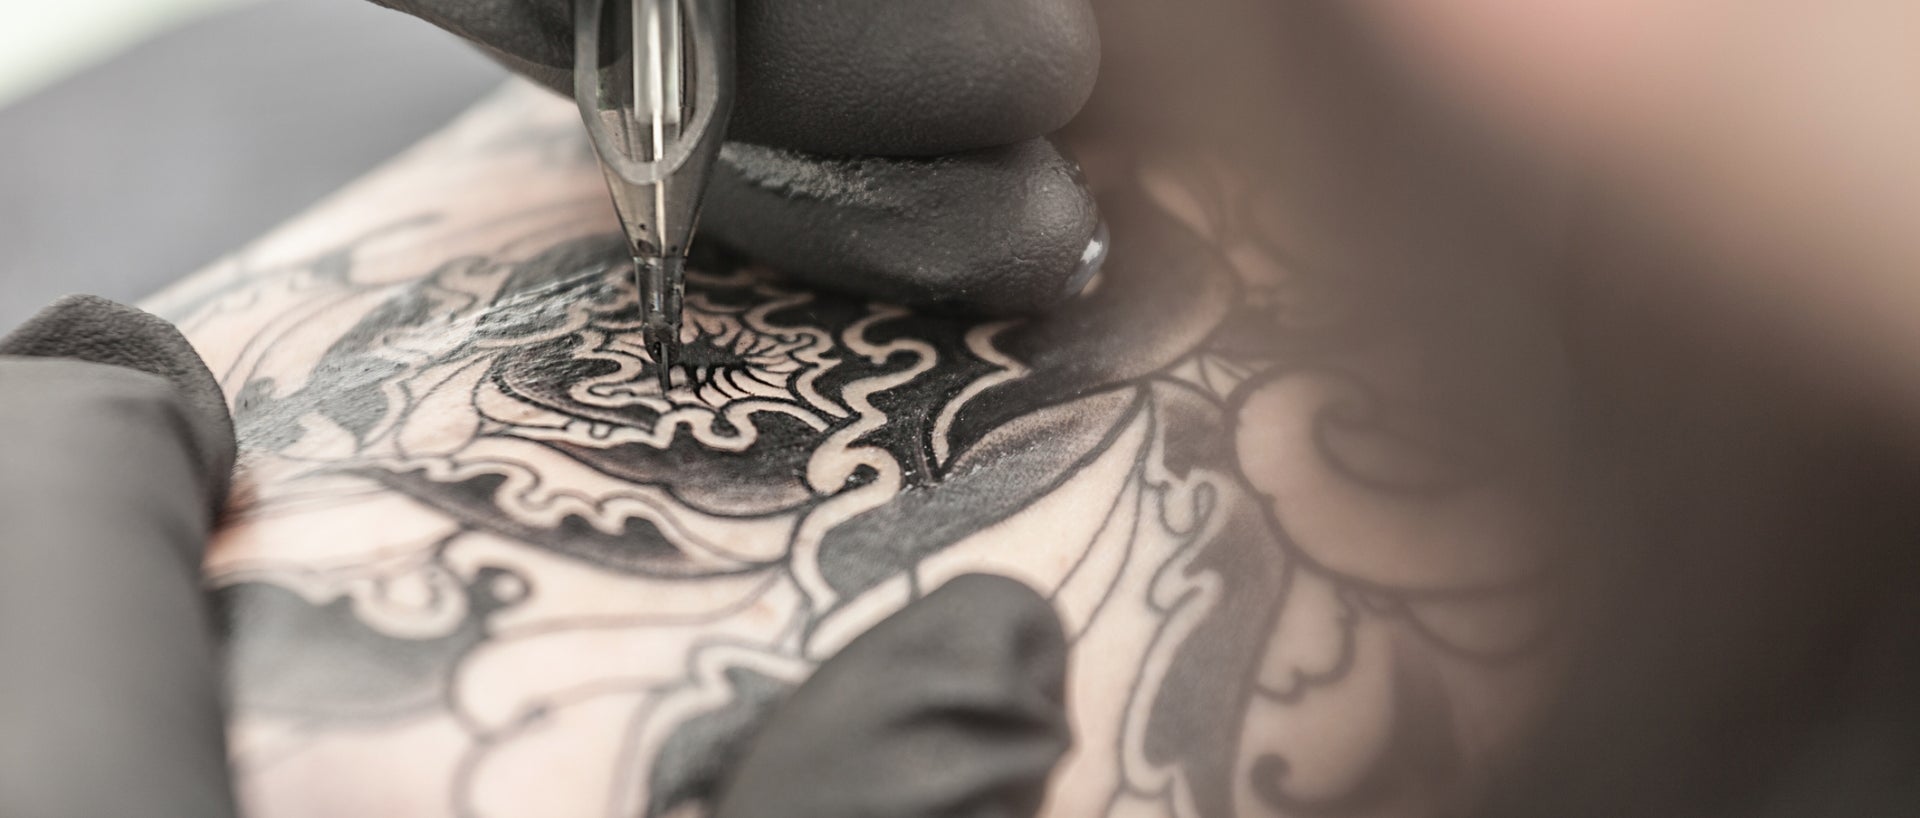 A new study found a possible carcinogen in many tattoo inks in the U.S.